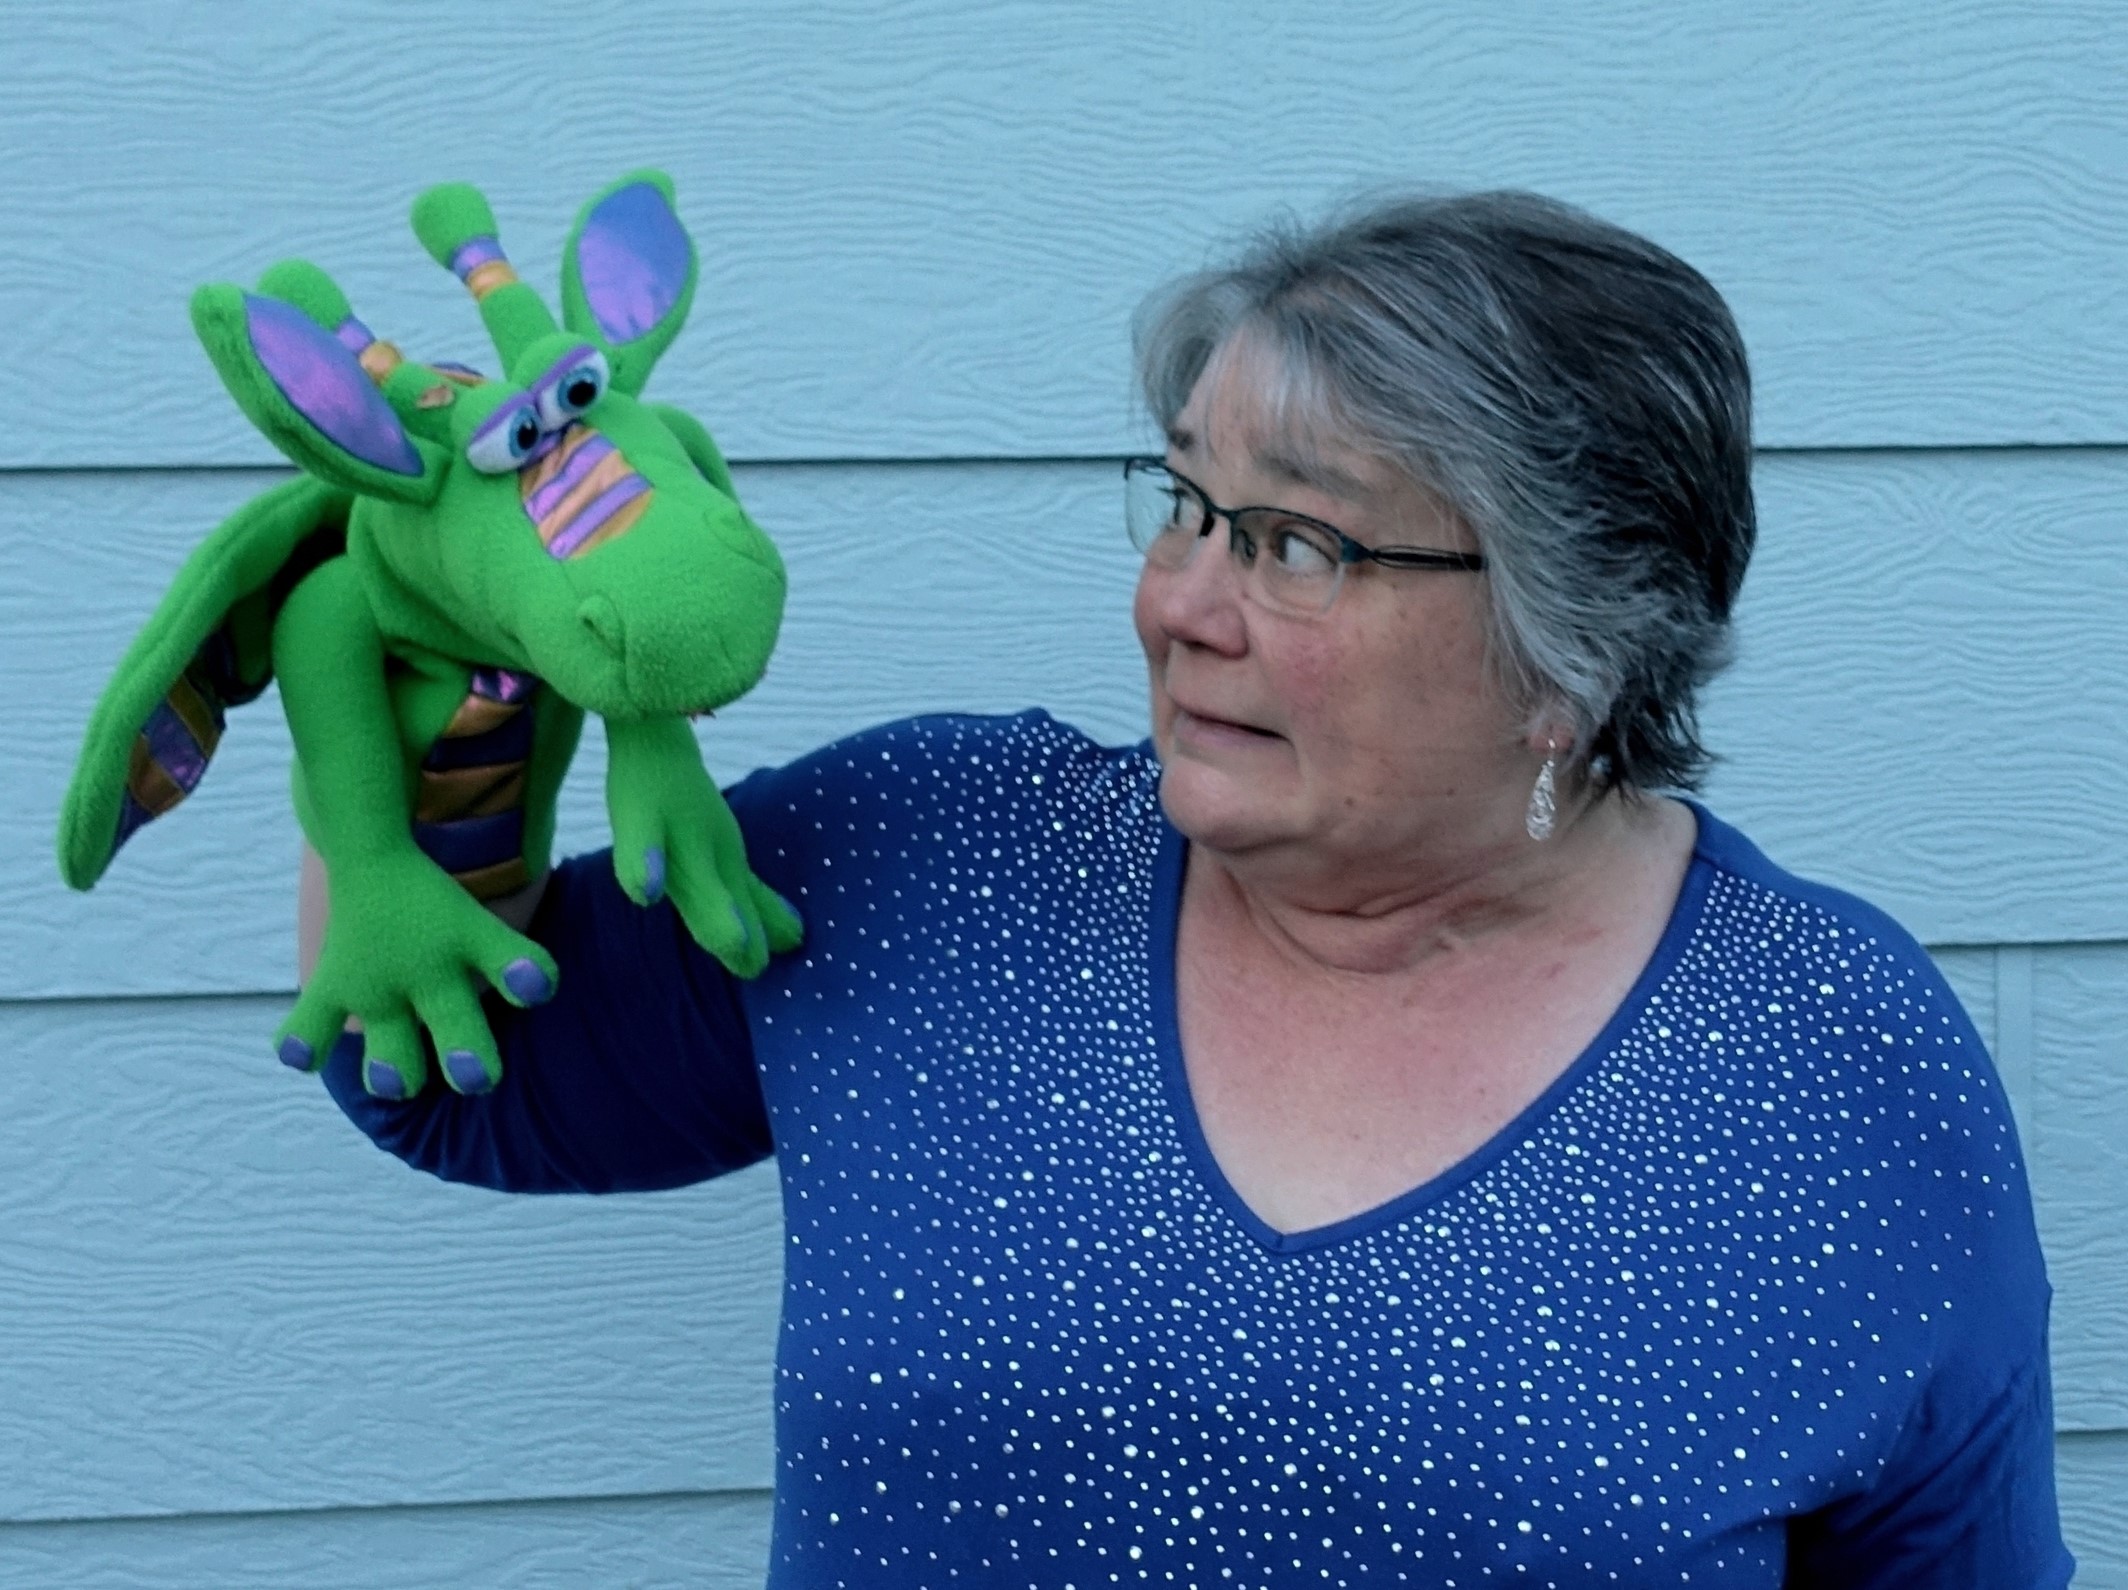 person holding green dragon puppet